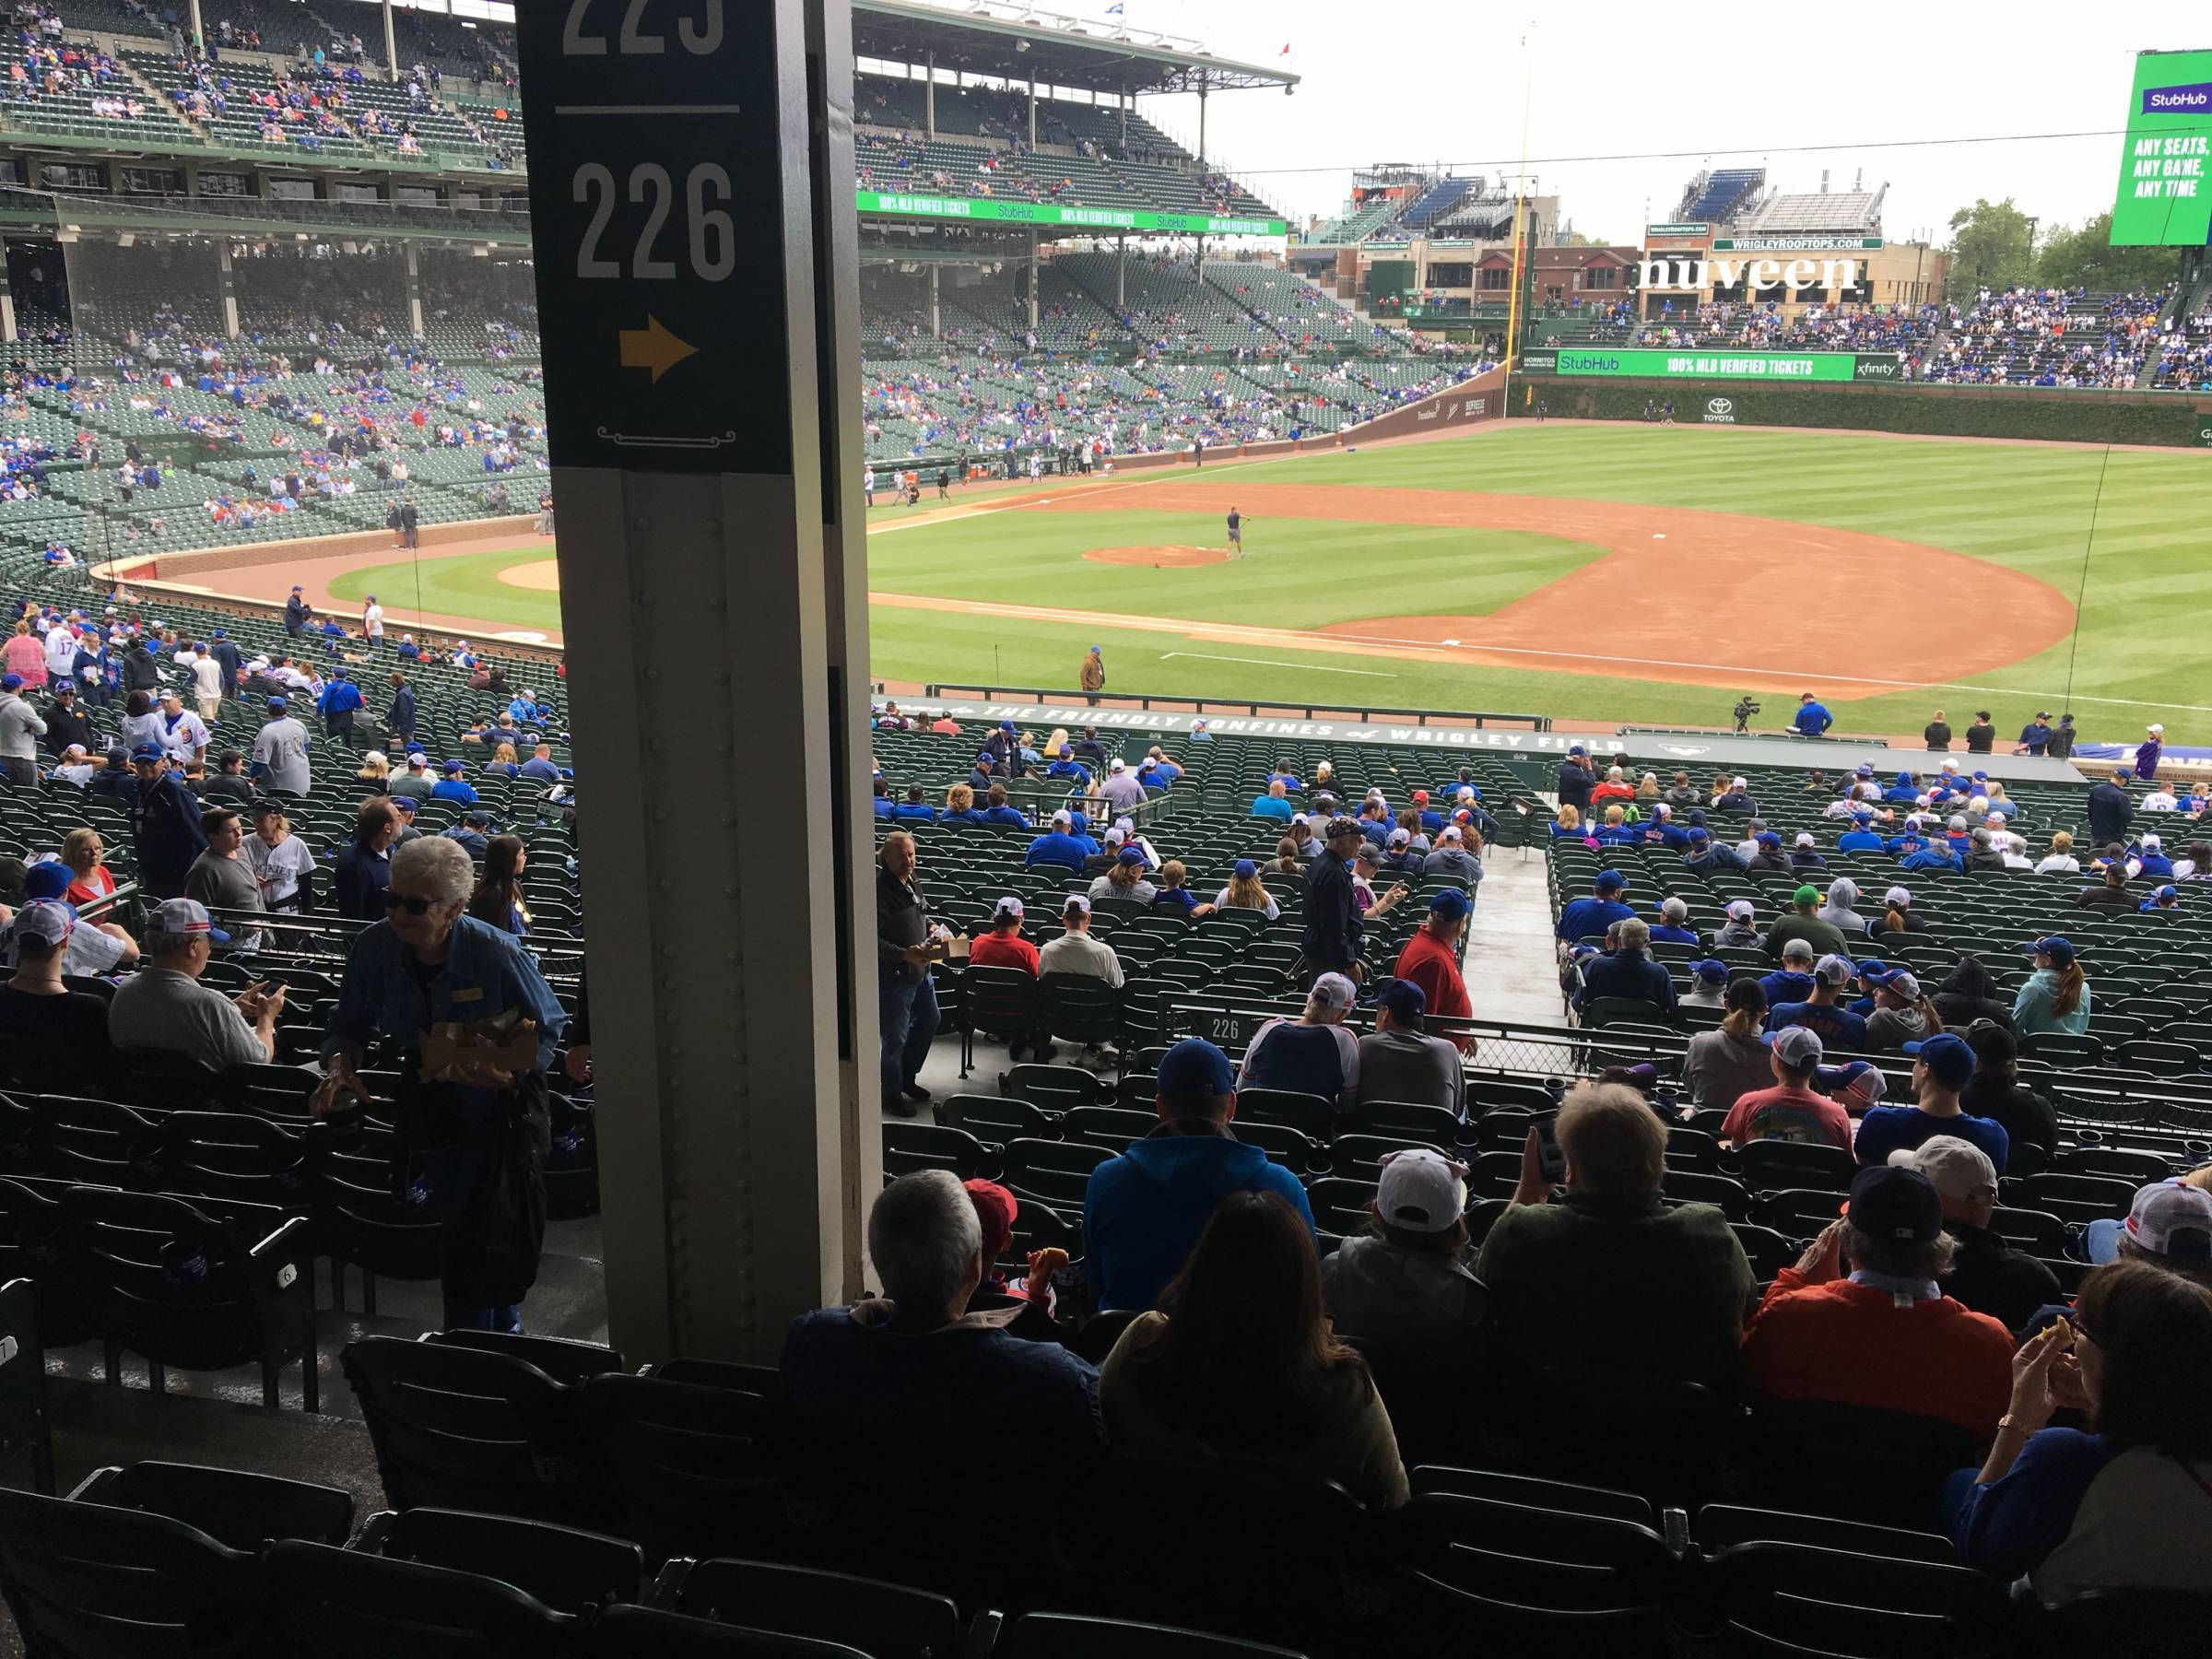 Pole in Section 226 at Wrigley Field